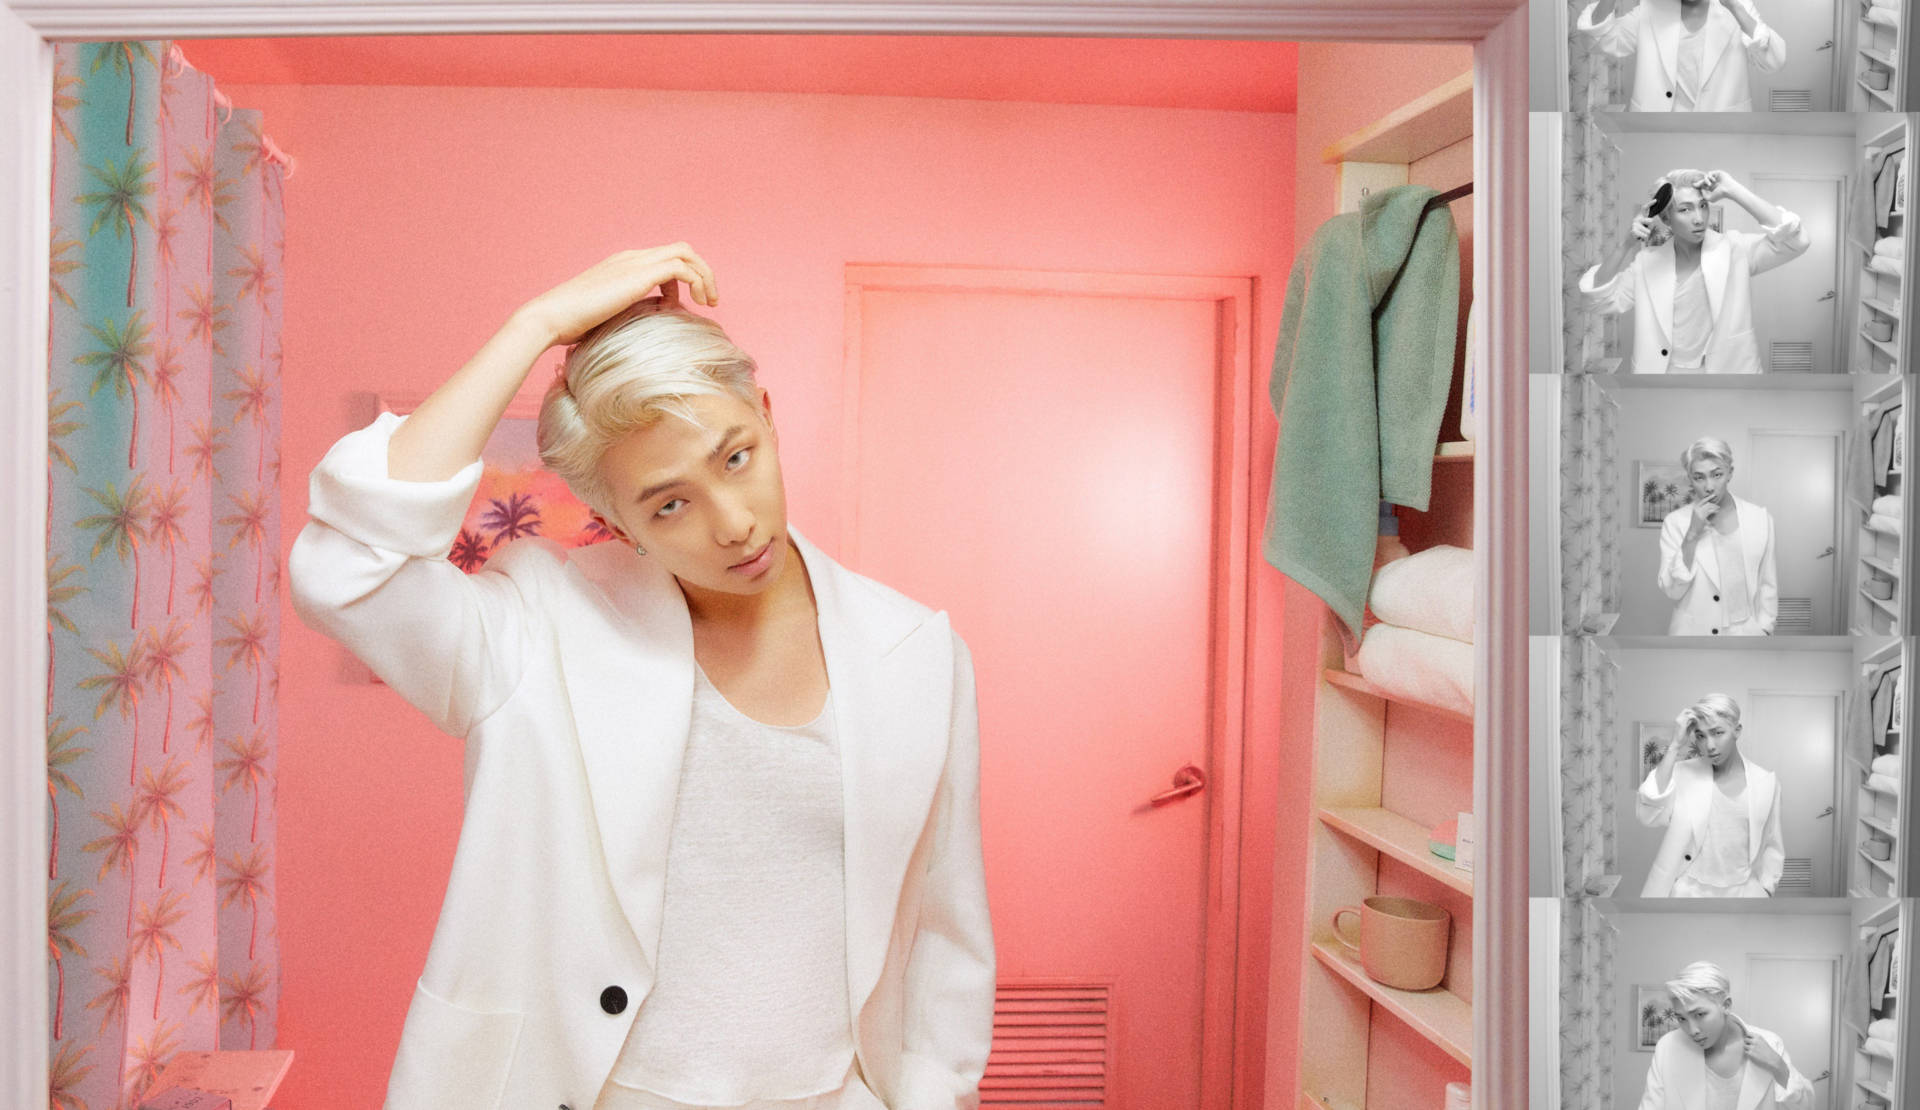 Rm Bts For Map Of The Soul Persona Background